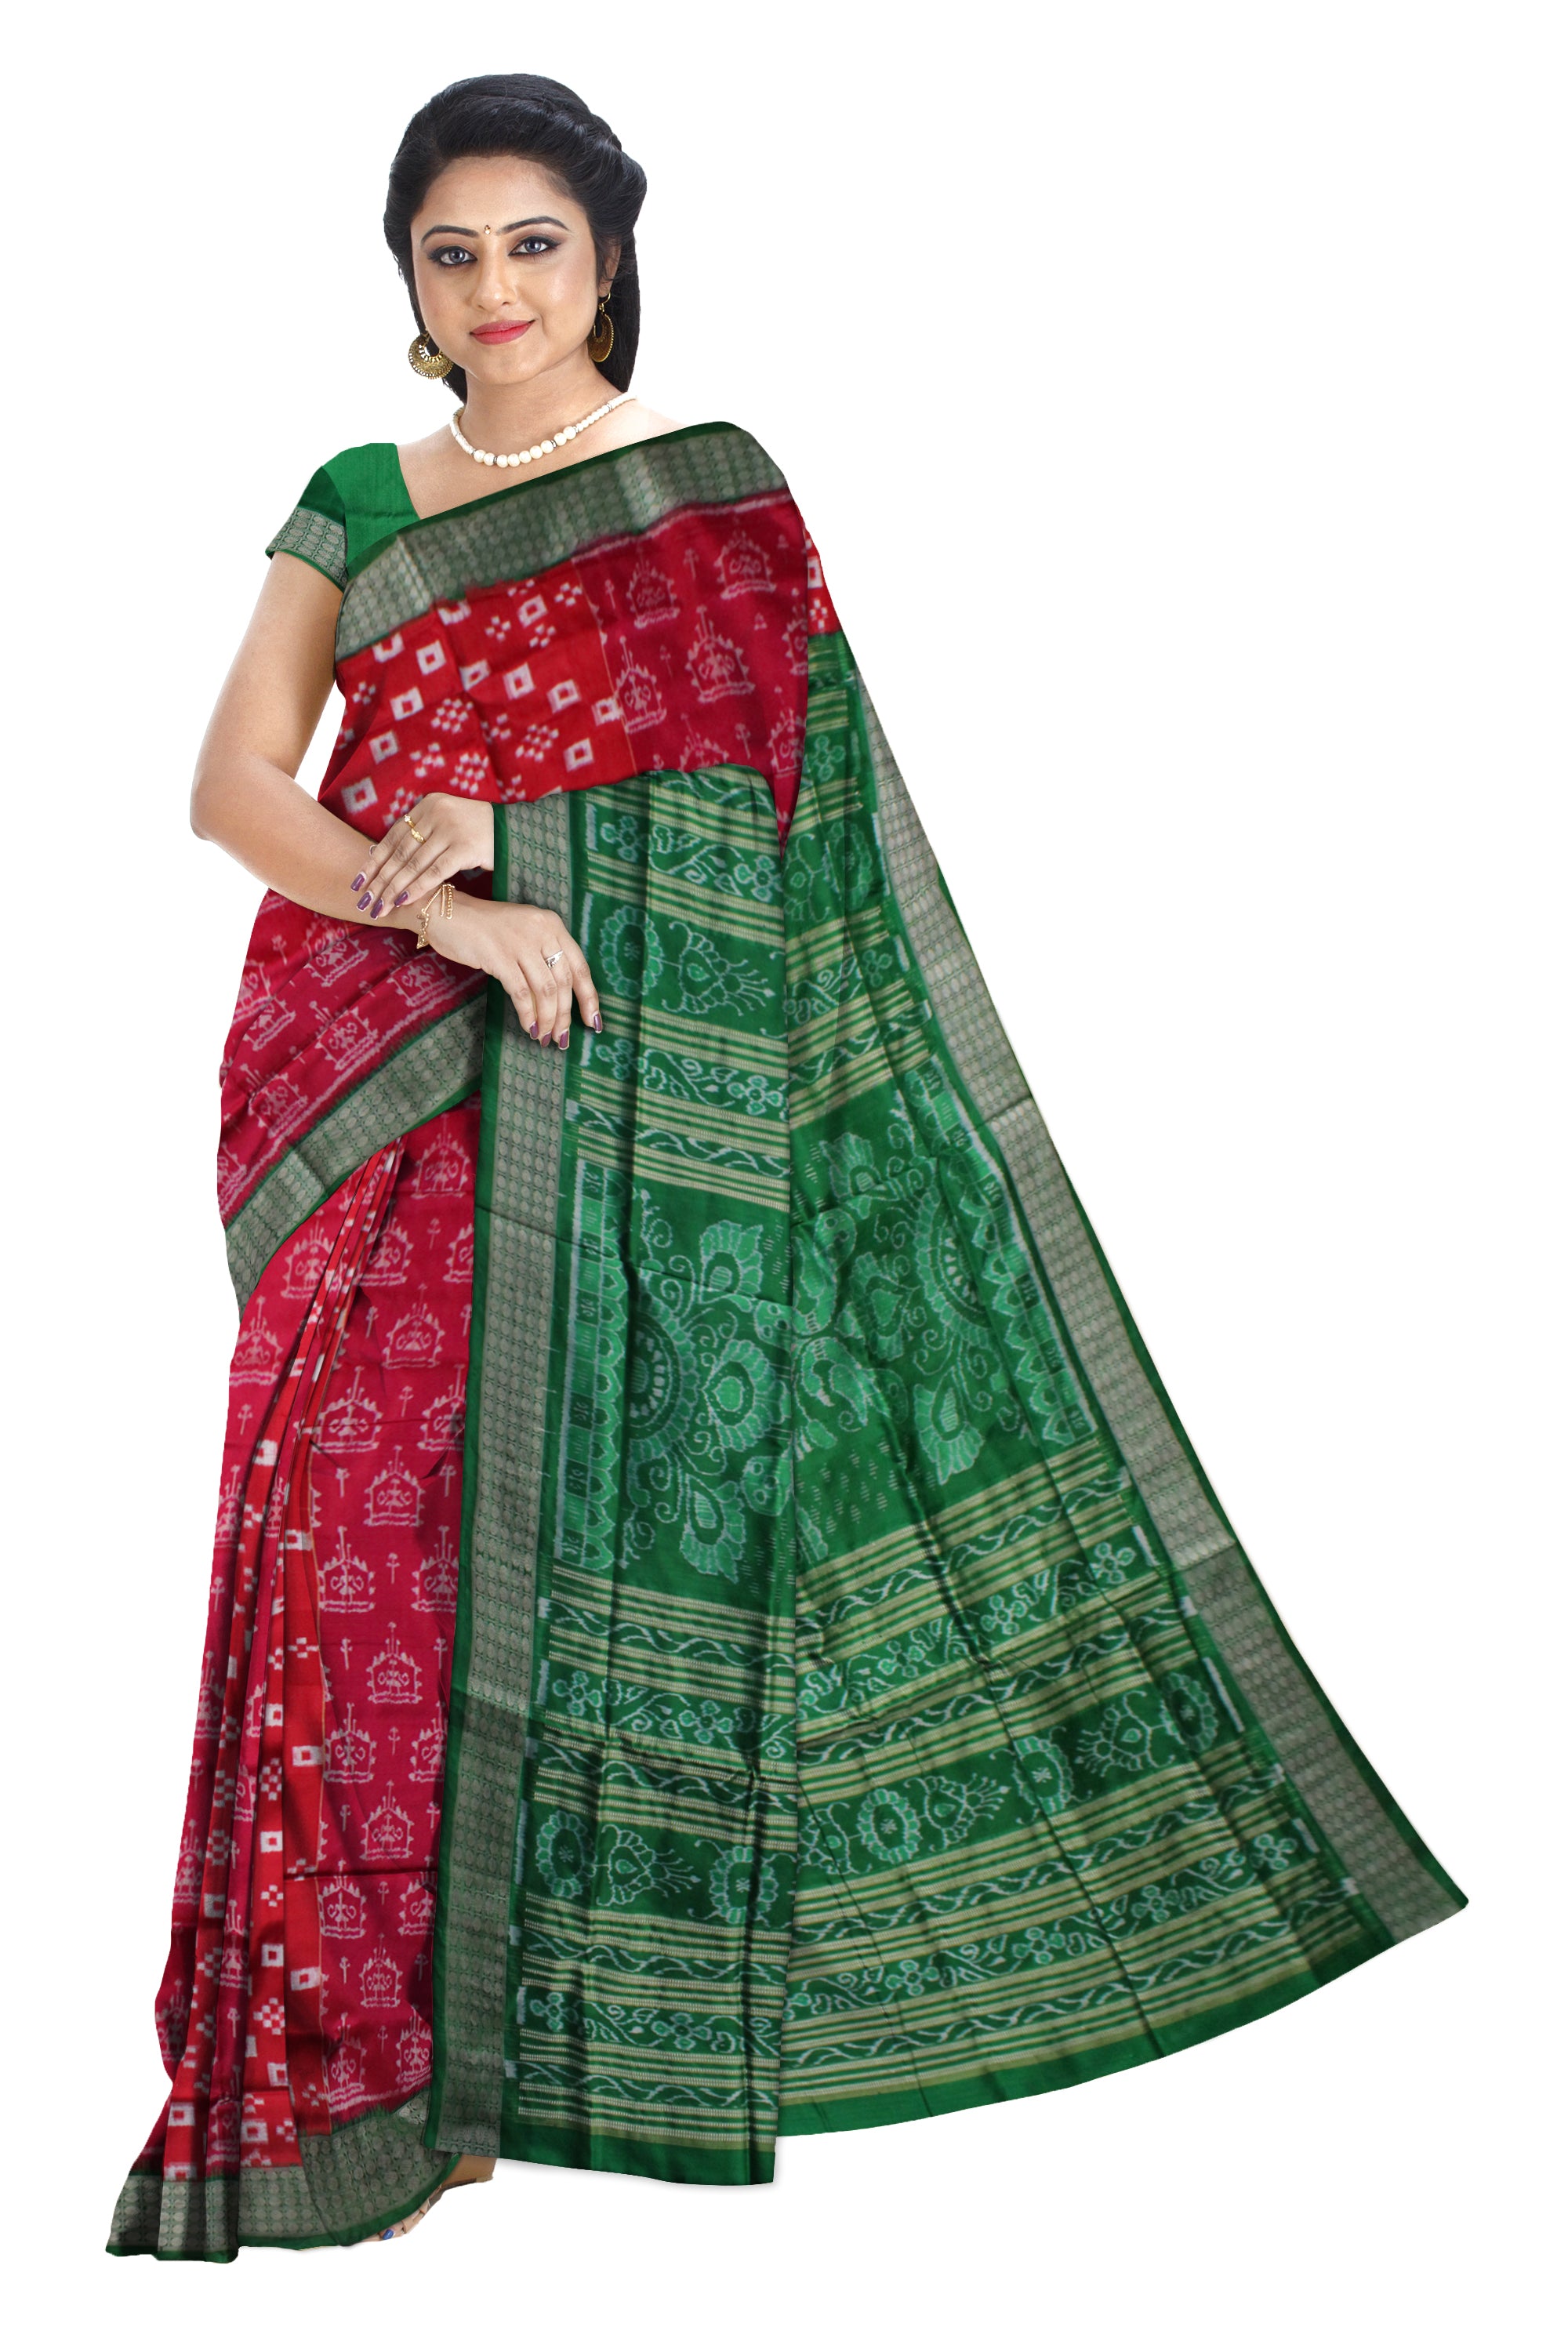 RED AND GREEN COLOR TERRACOTTA WITH PASAPALI PATTERN PURE SILK SAREE,WITH MATCHING BLOUSE PIECE. - Koshali Arts & Crafts Enterprise